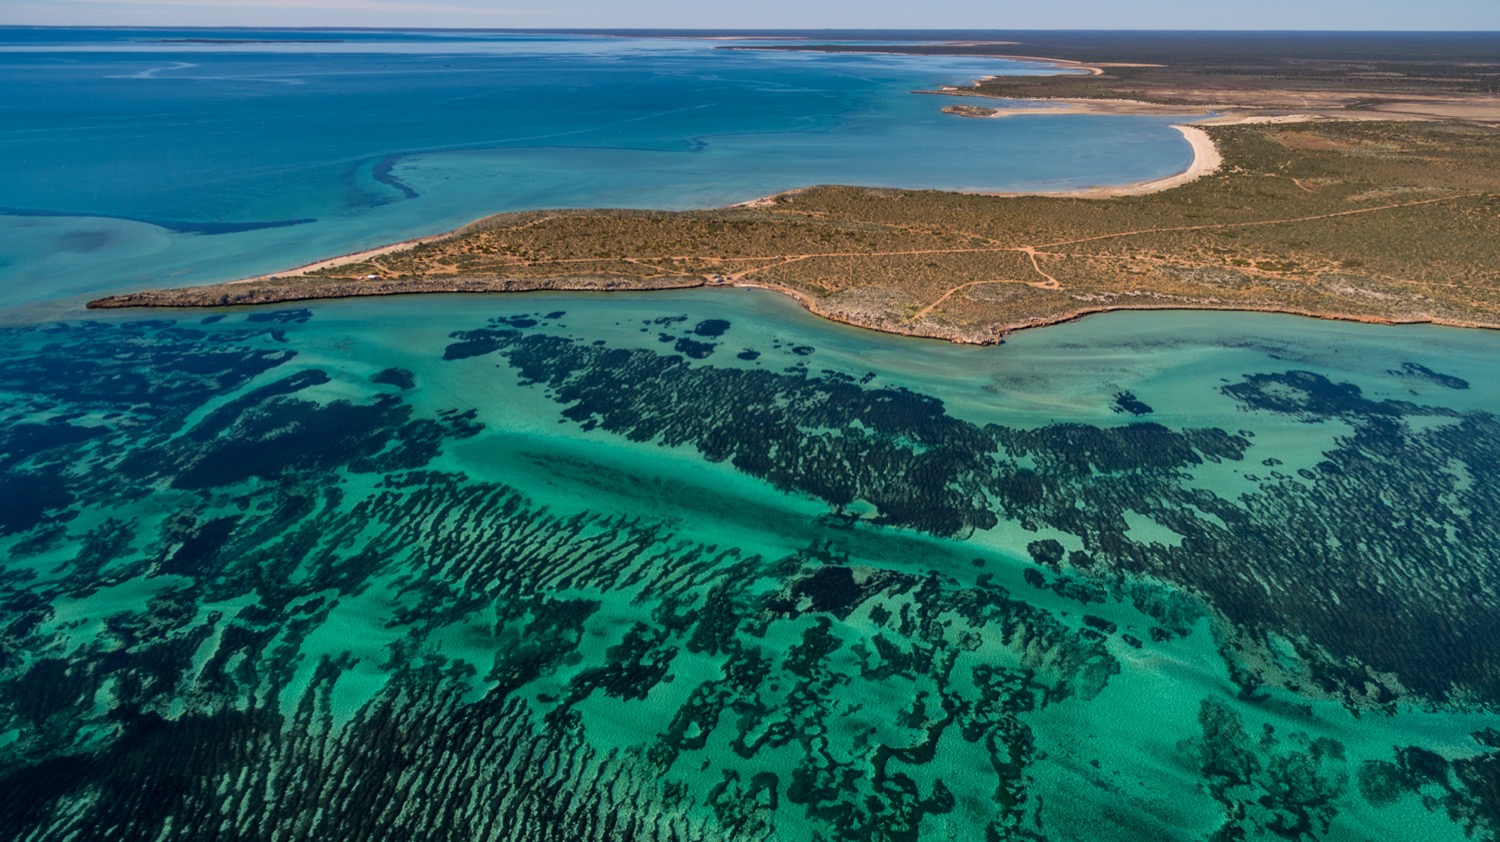 an aerial shot of some land, a bay, and crystal clear turquoise waters with dark patches of seagrass visible. it coats most of the visible shallow sea floor